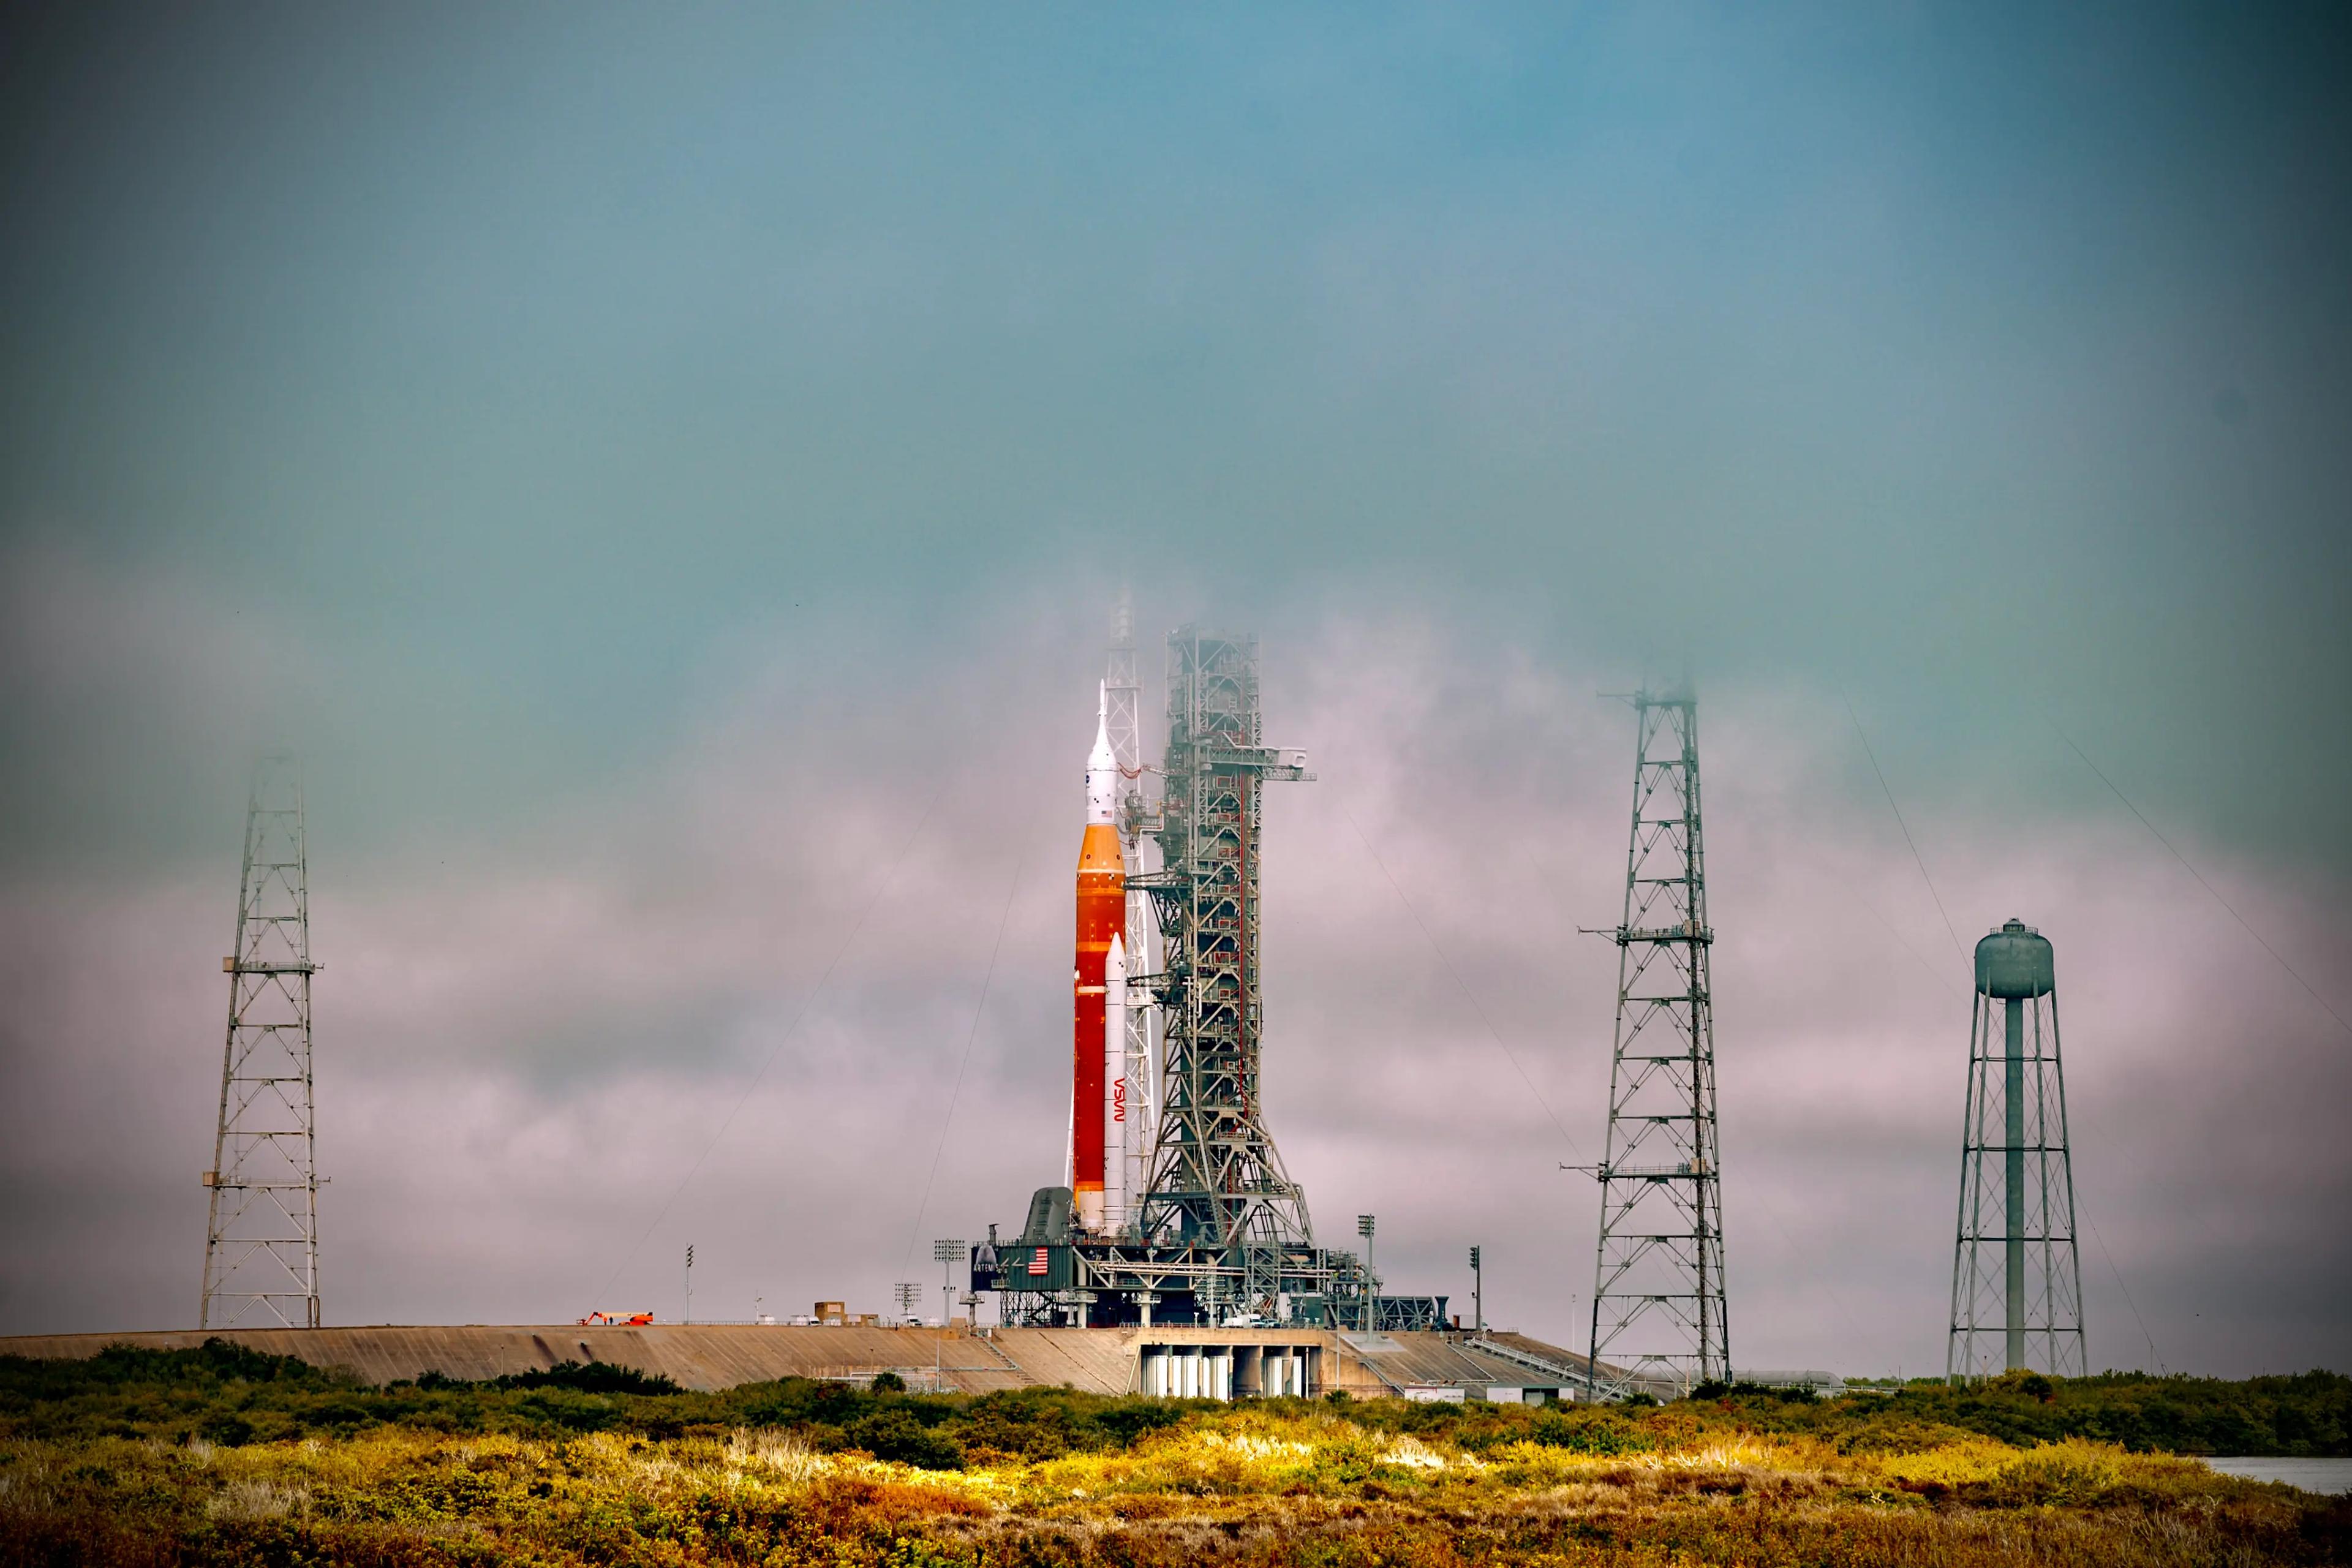 Foggy view of a rocket ready to take off from launch tower